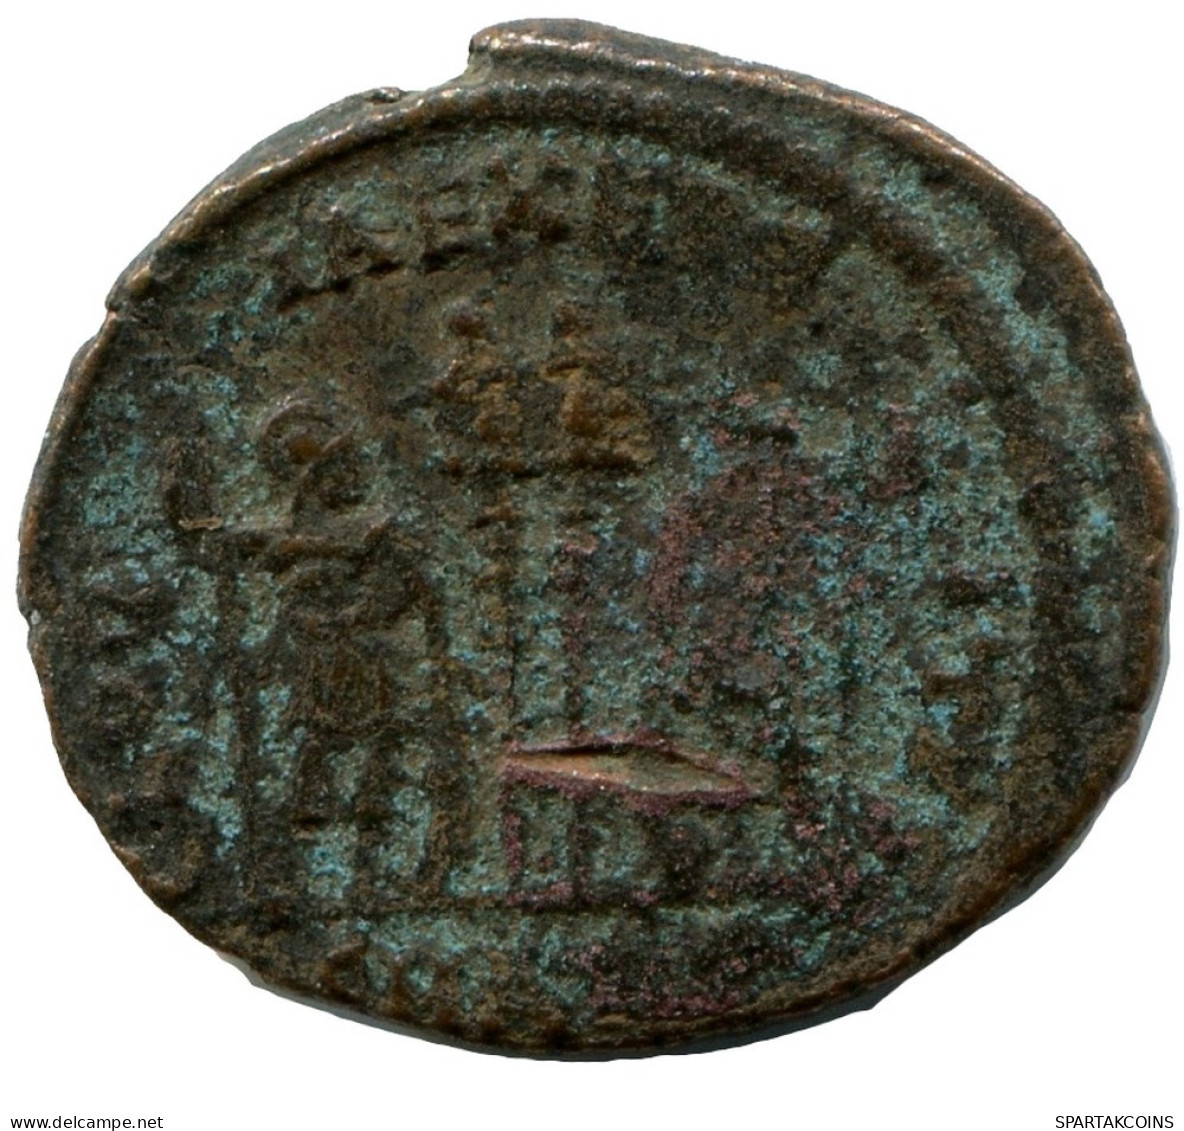 CONSTANTINE I MINTED IN ANTIOCH FOUND IN IHNASYAH HOARD EGYPT #ANC10700.14.E.A - L'Empire Chrétien (307 à 363)